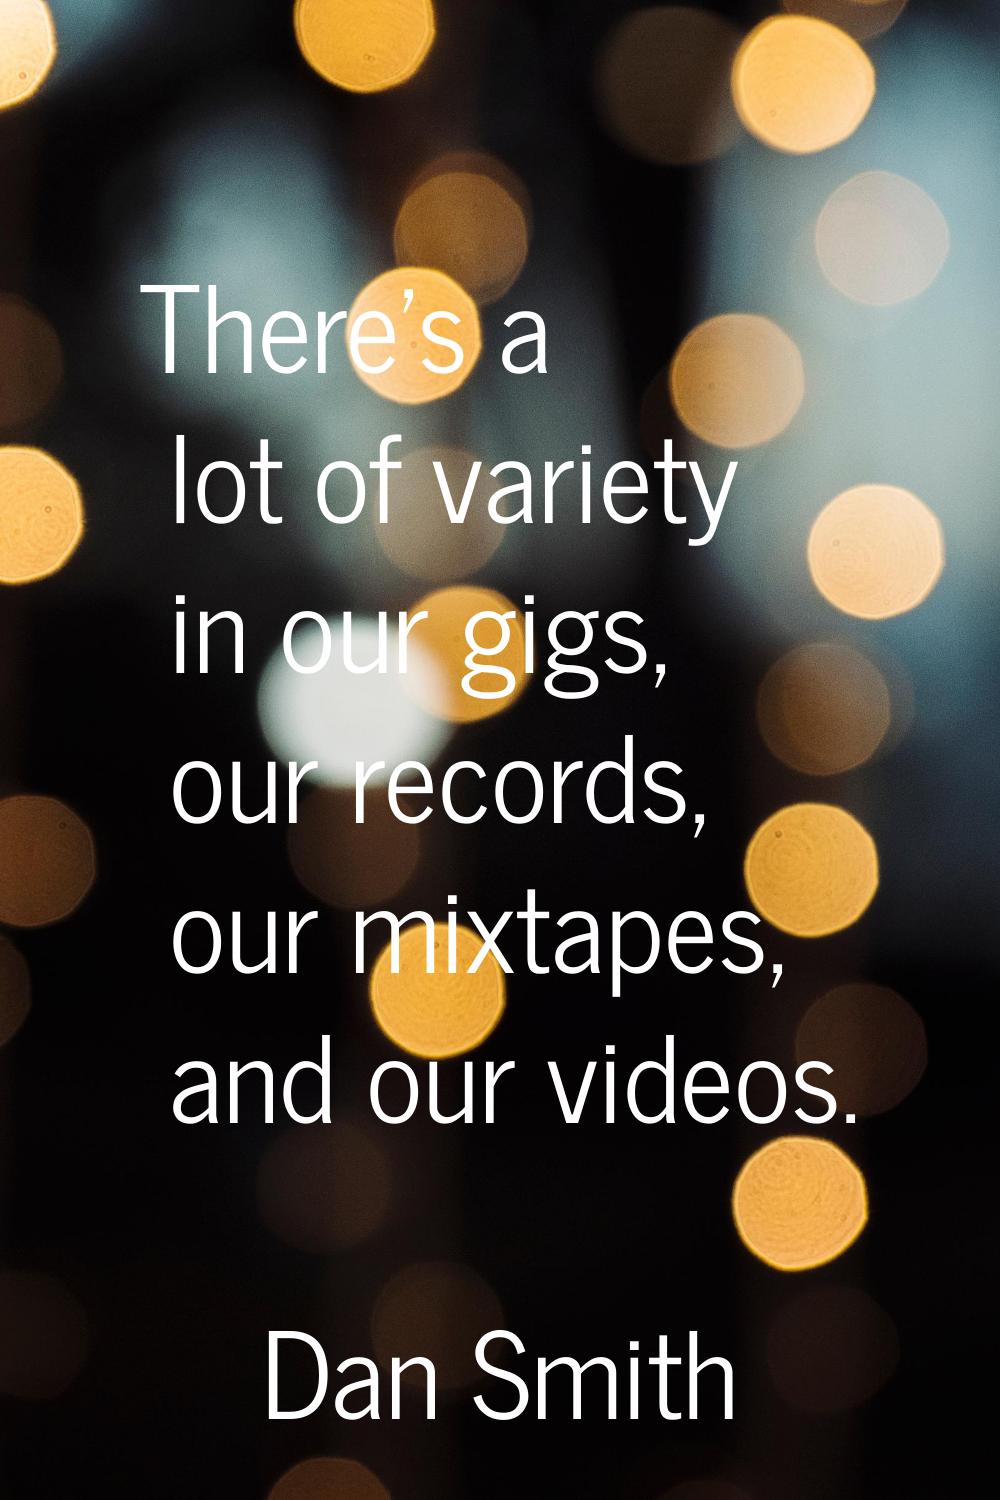 There's a lot of variety in our gigs, our records, our mixtapes, and our videos.